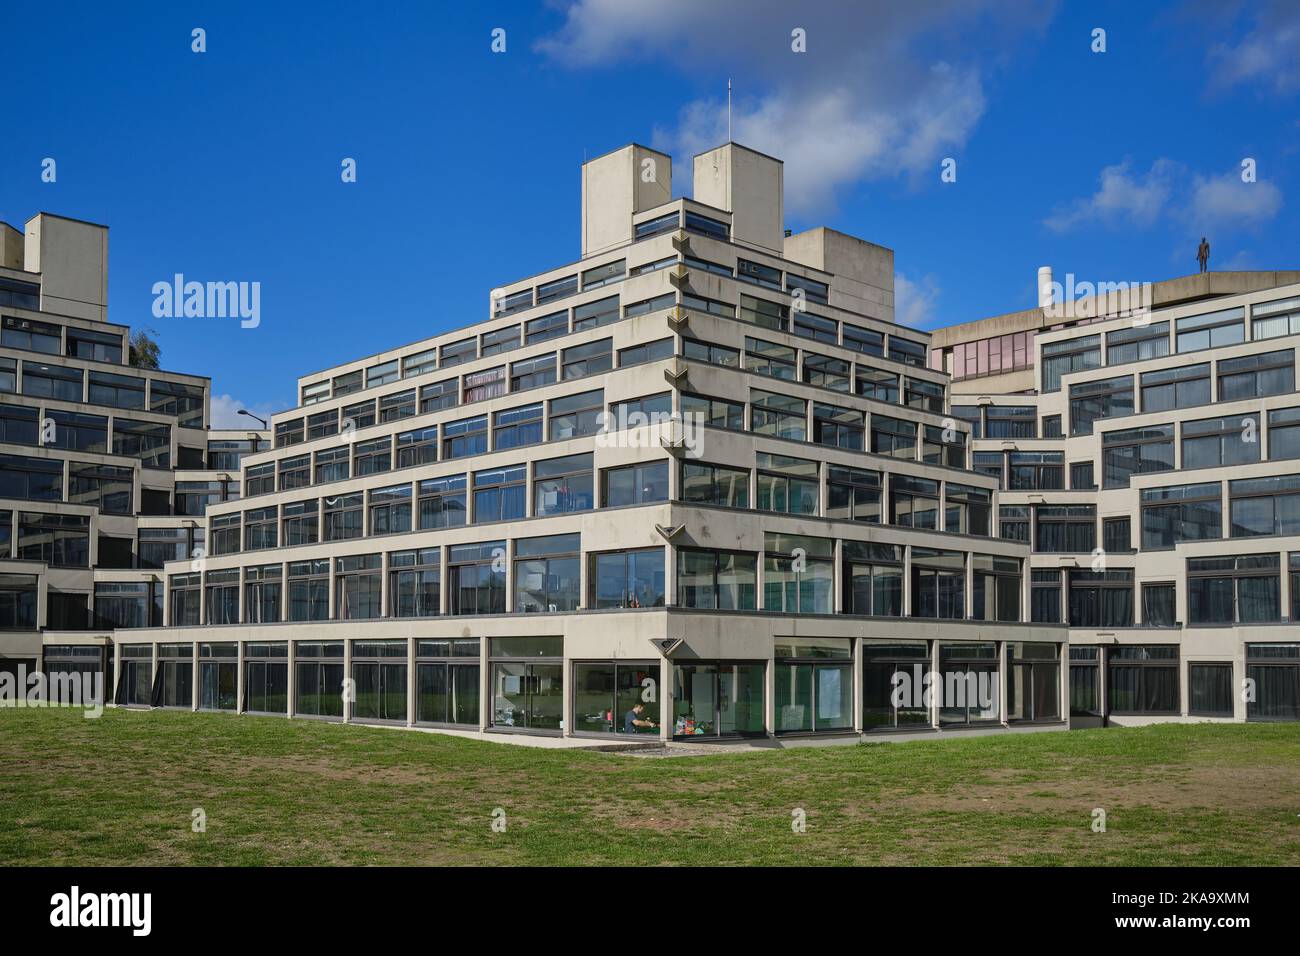 Student flats, known as the Ziggurats, at University of East Anglia, Norwich, designed by Sir Denys Lasdun in the 1960s Stock Photo